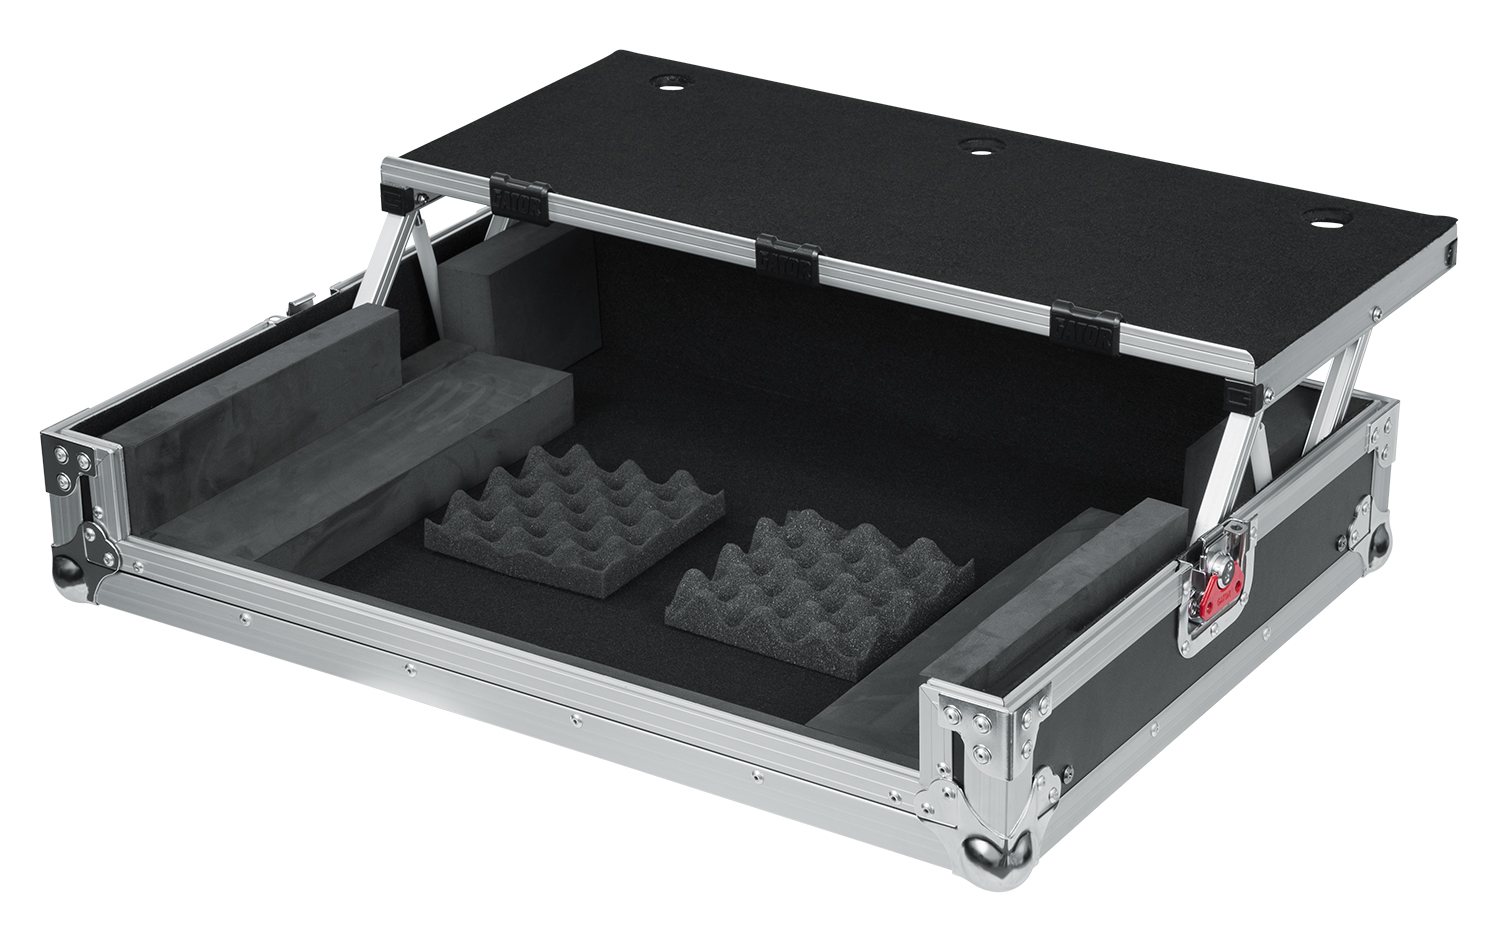 G-TOUR DSP case for medium sized DJ controllers